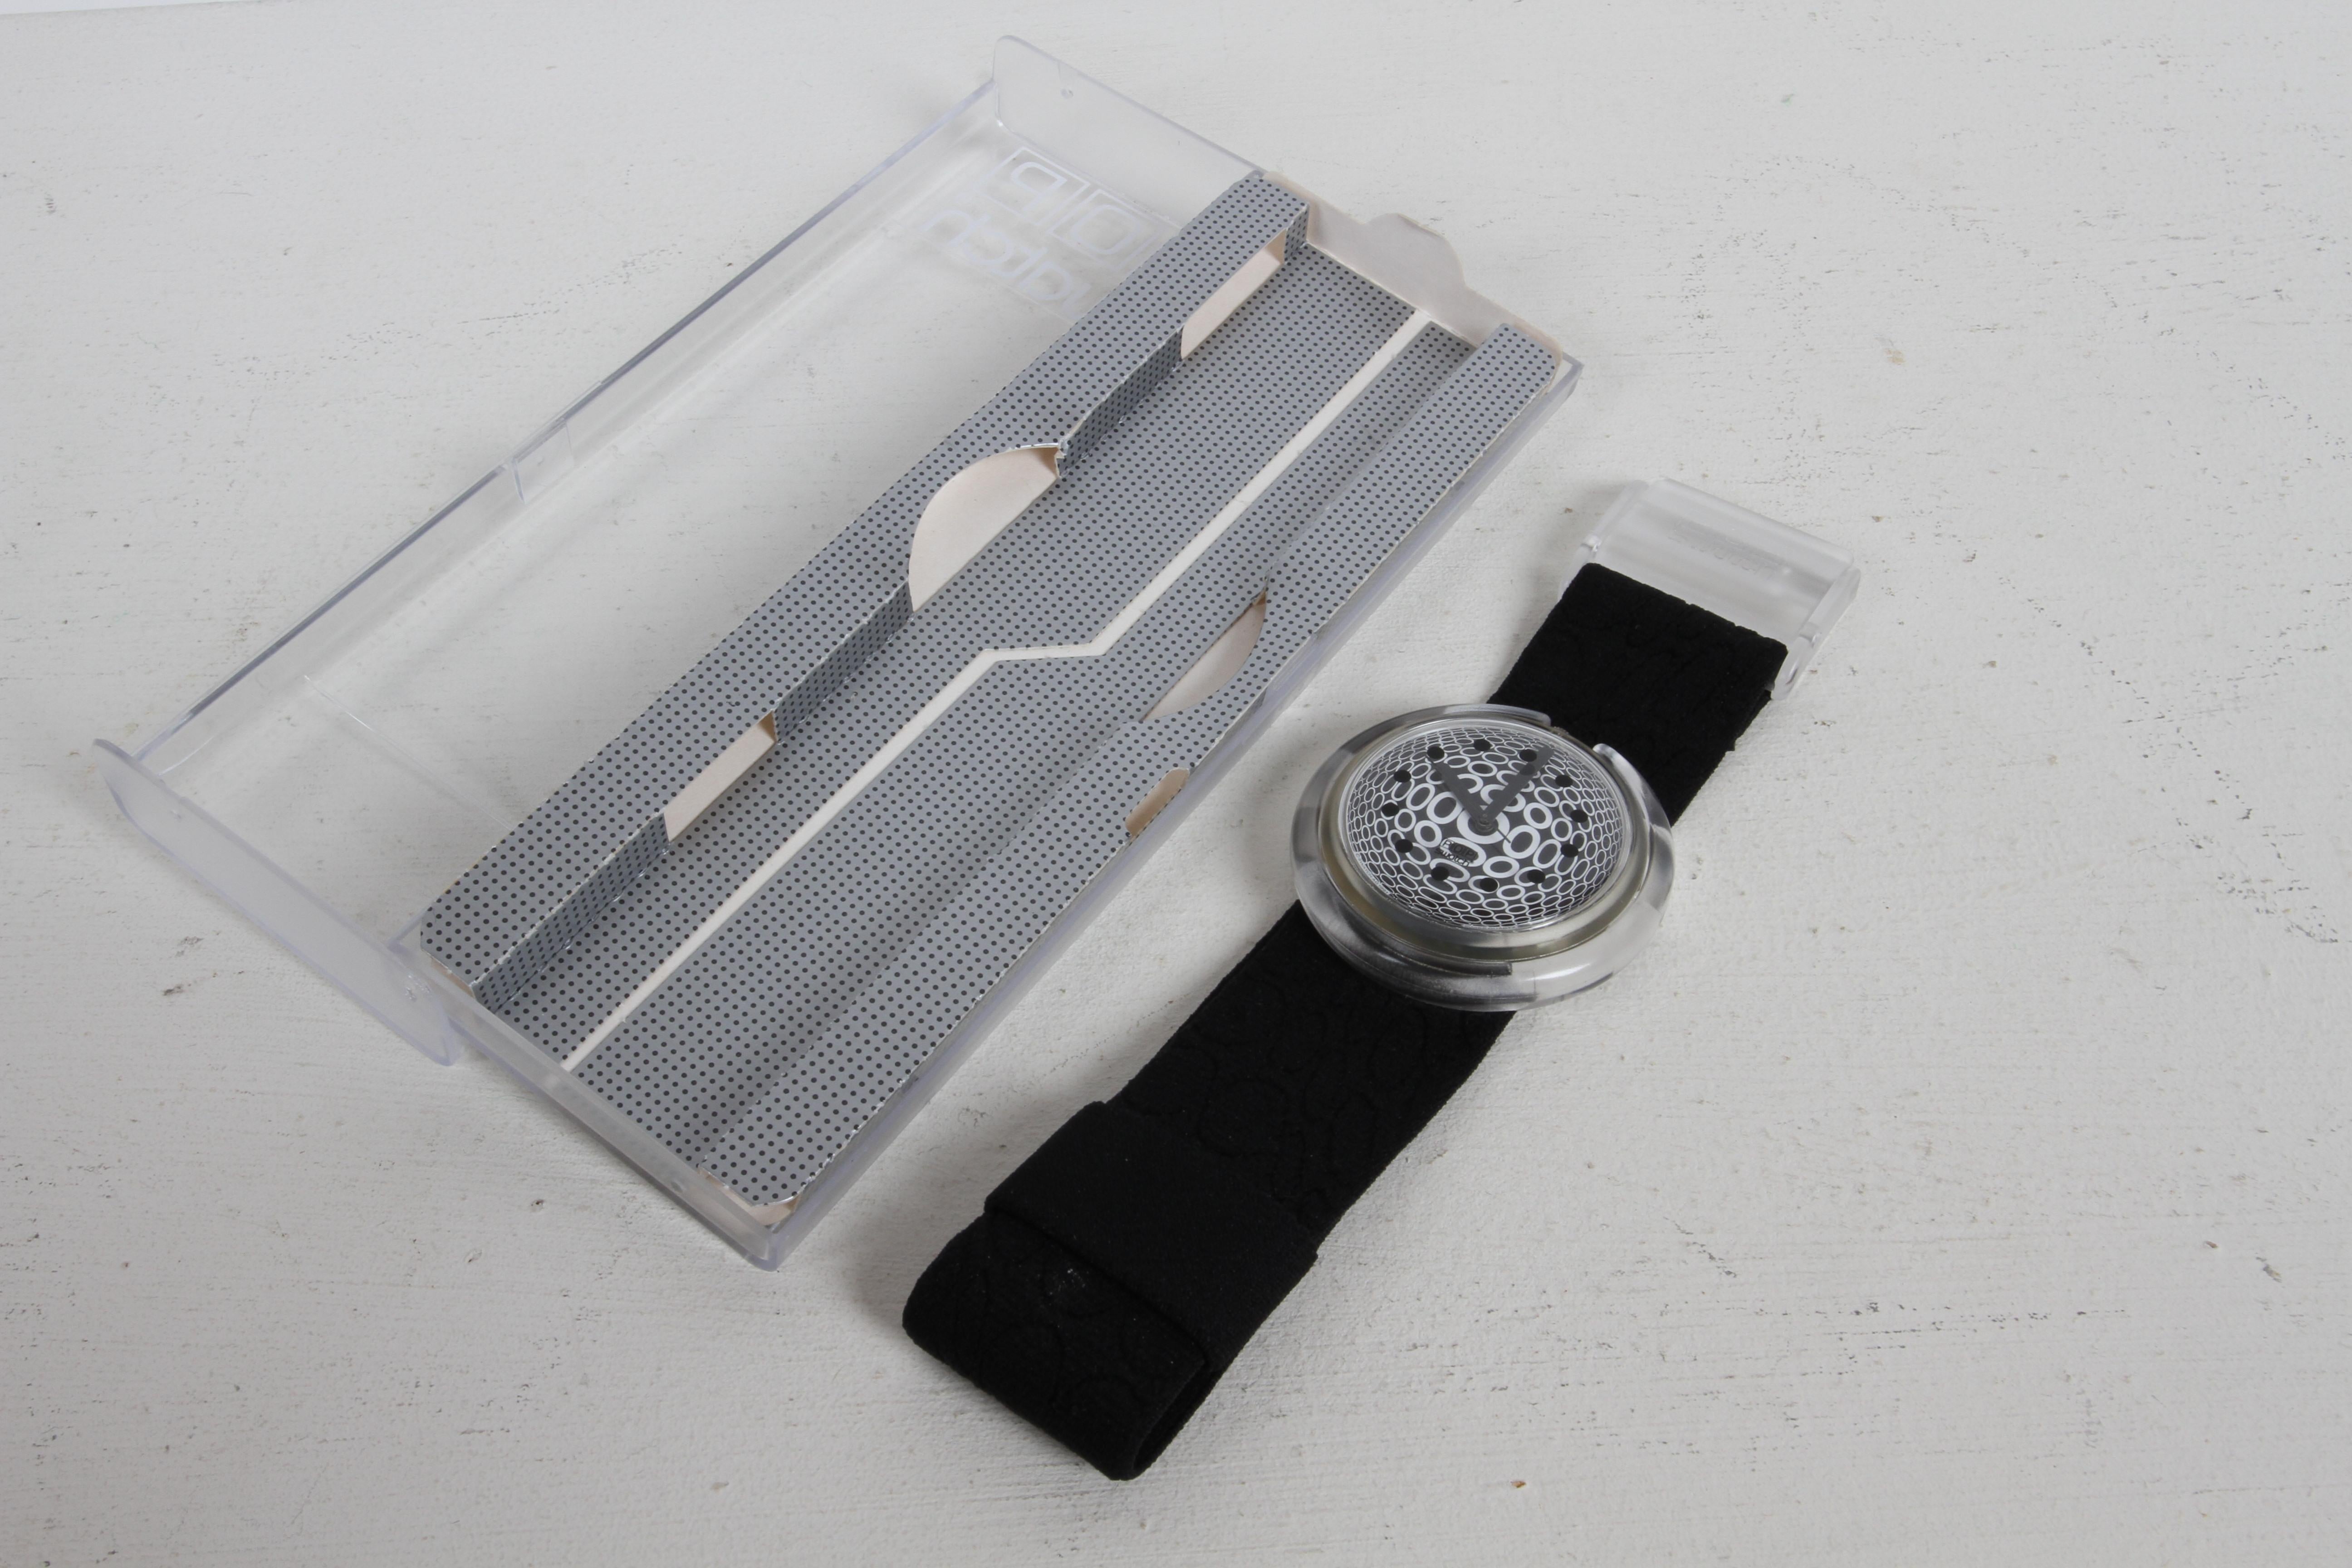 1992 Vintage POP Swatch Watch Special Dots - Op Art - Designed by Vasarely - NOS For Sale 11